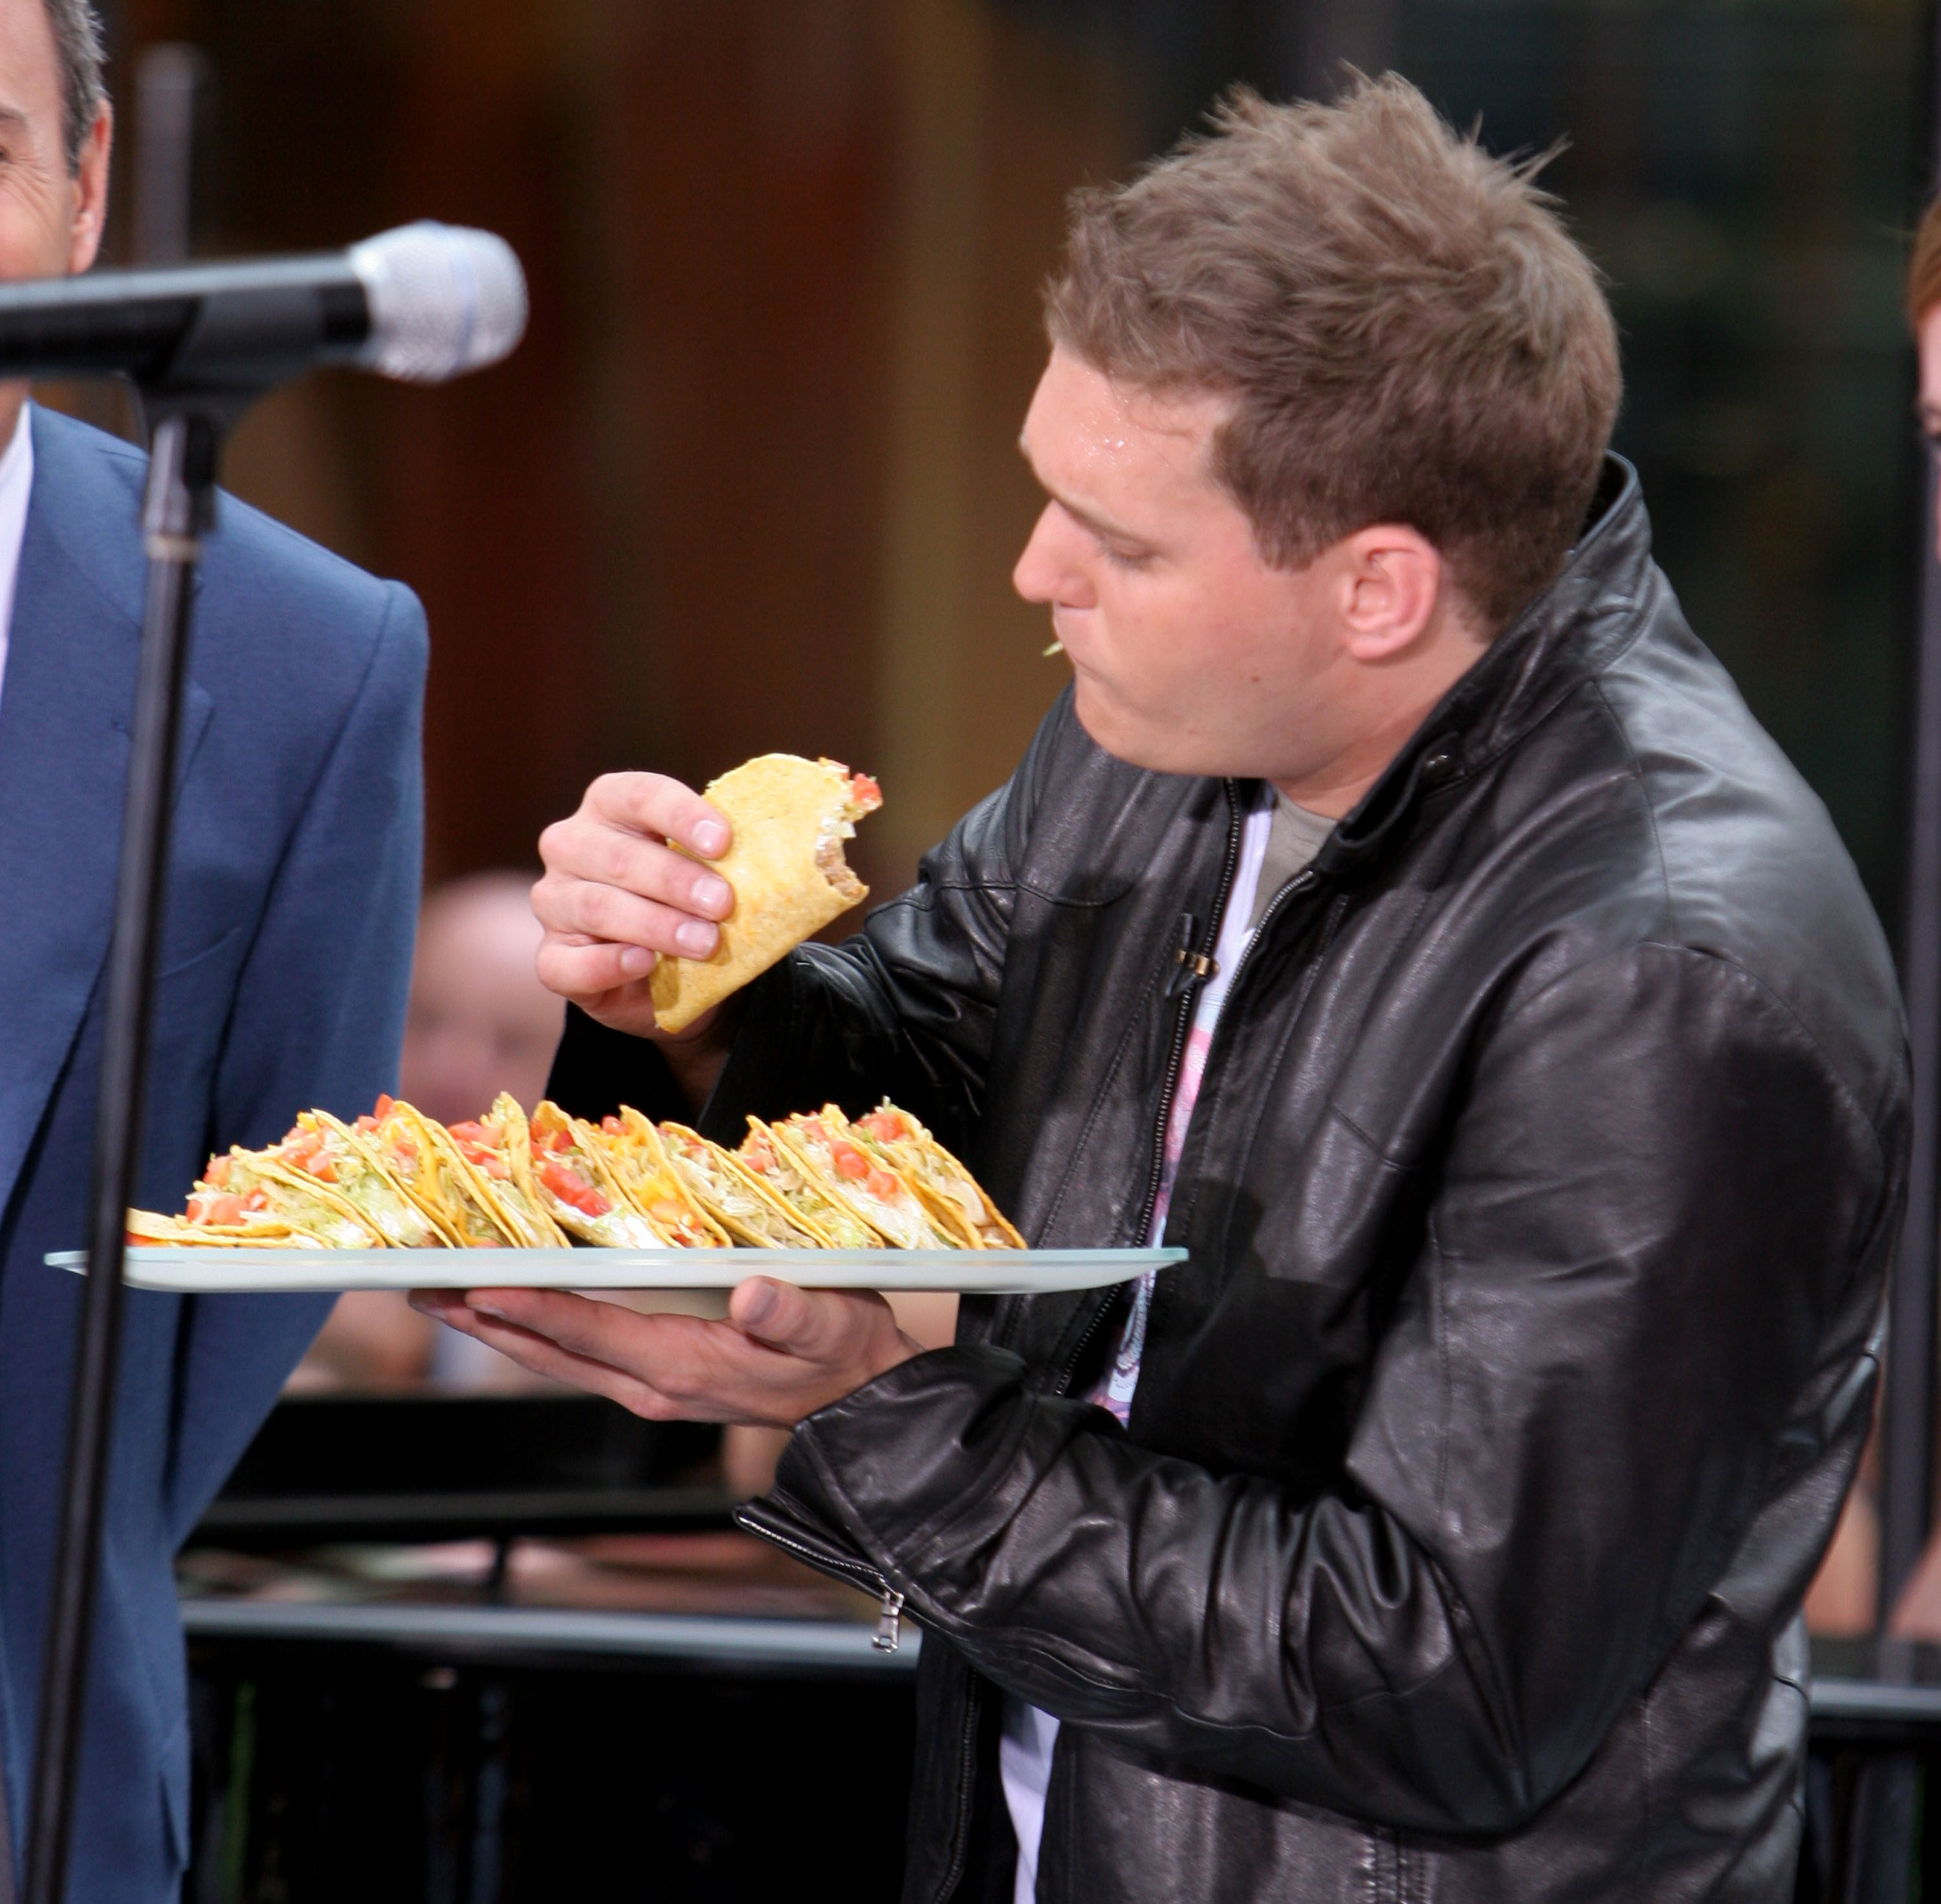 Michael Bublé eating before performing at The Today Show Summer Concert Series in New York City, New York, on August 19, 2005 | Source: Getty Images